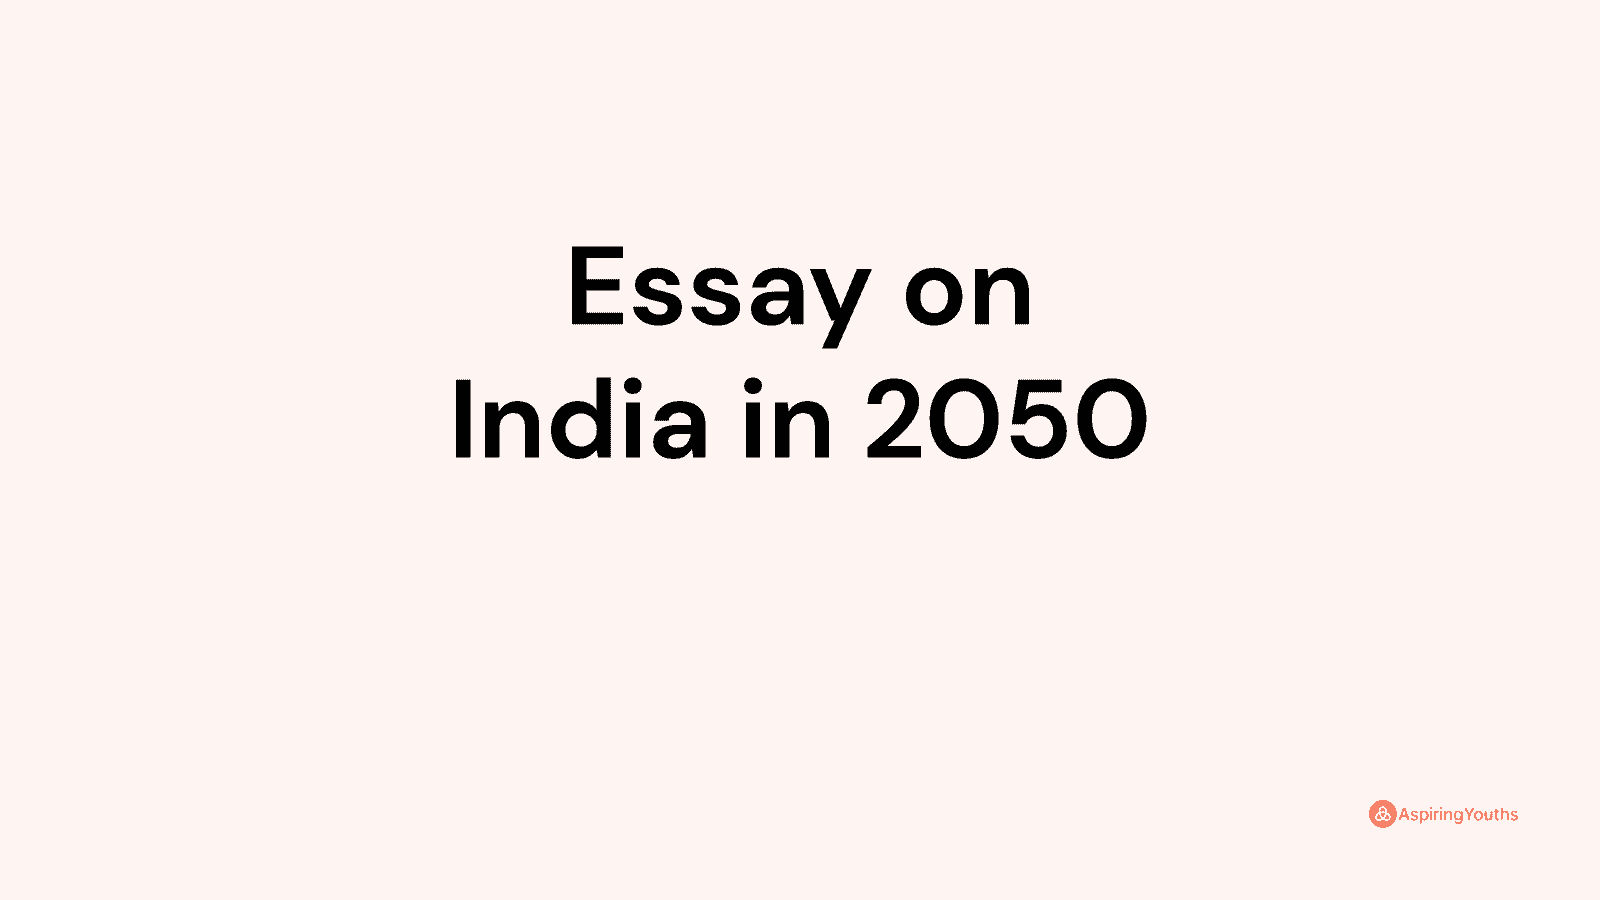 india by 2050 essay